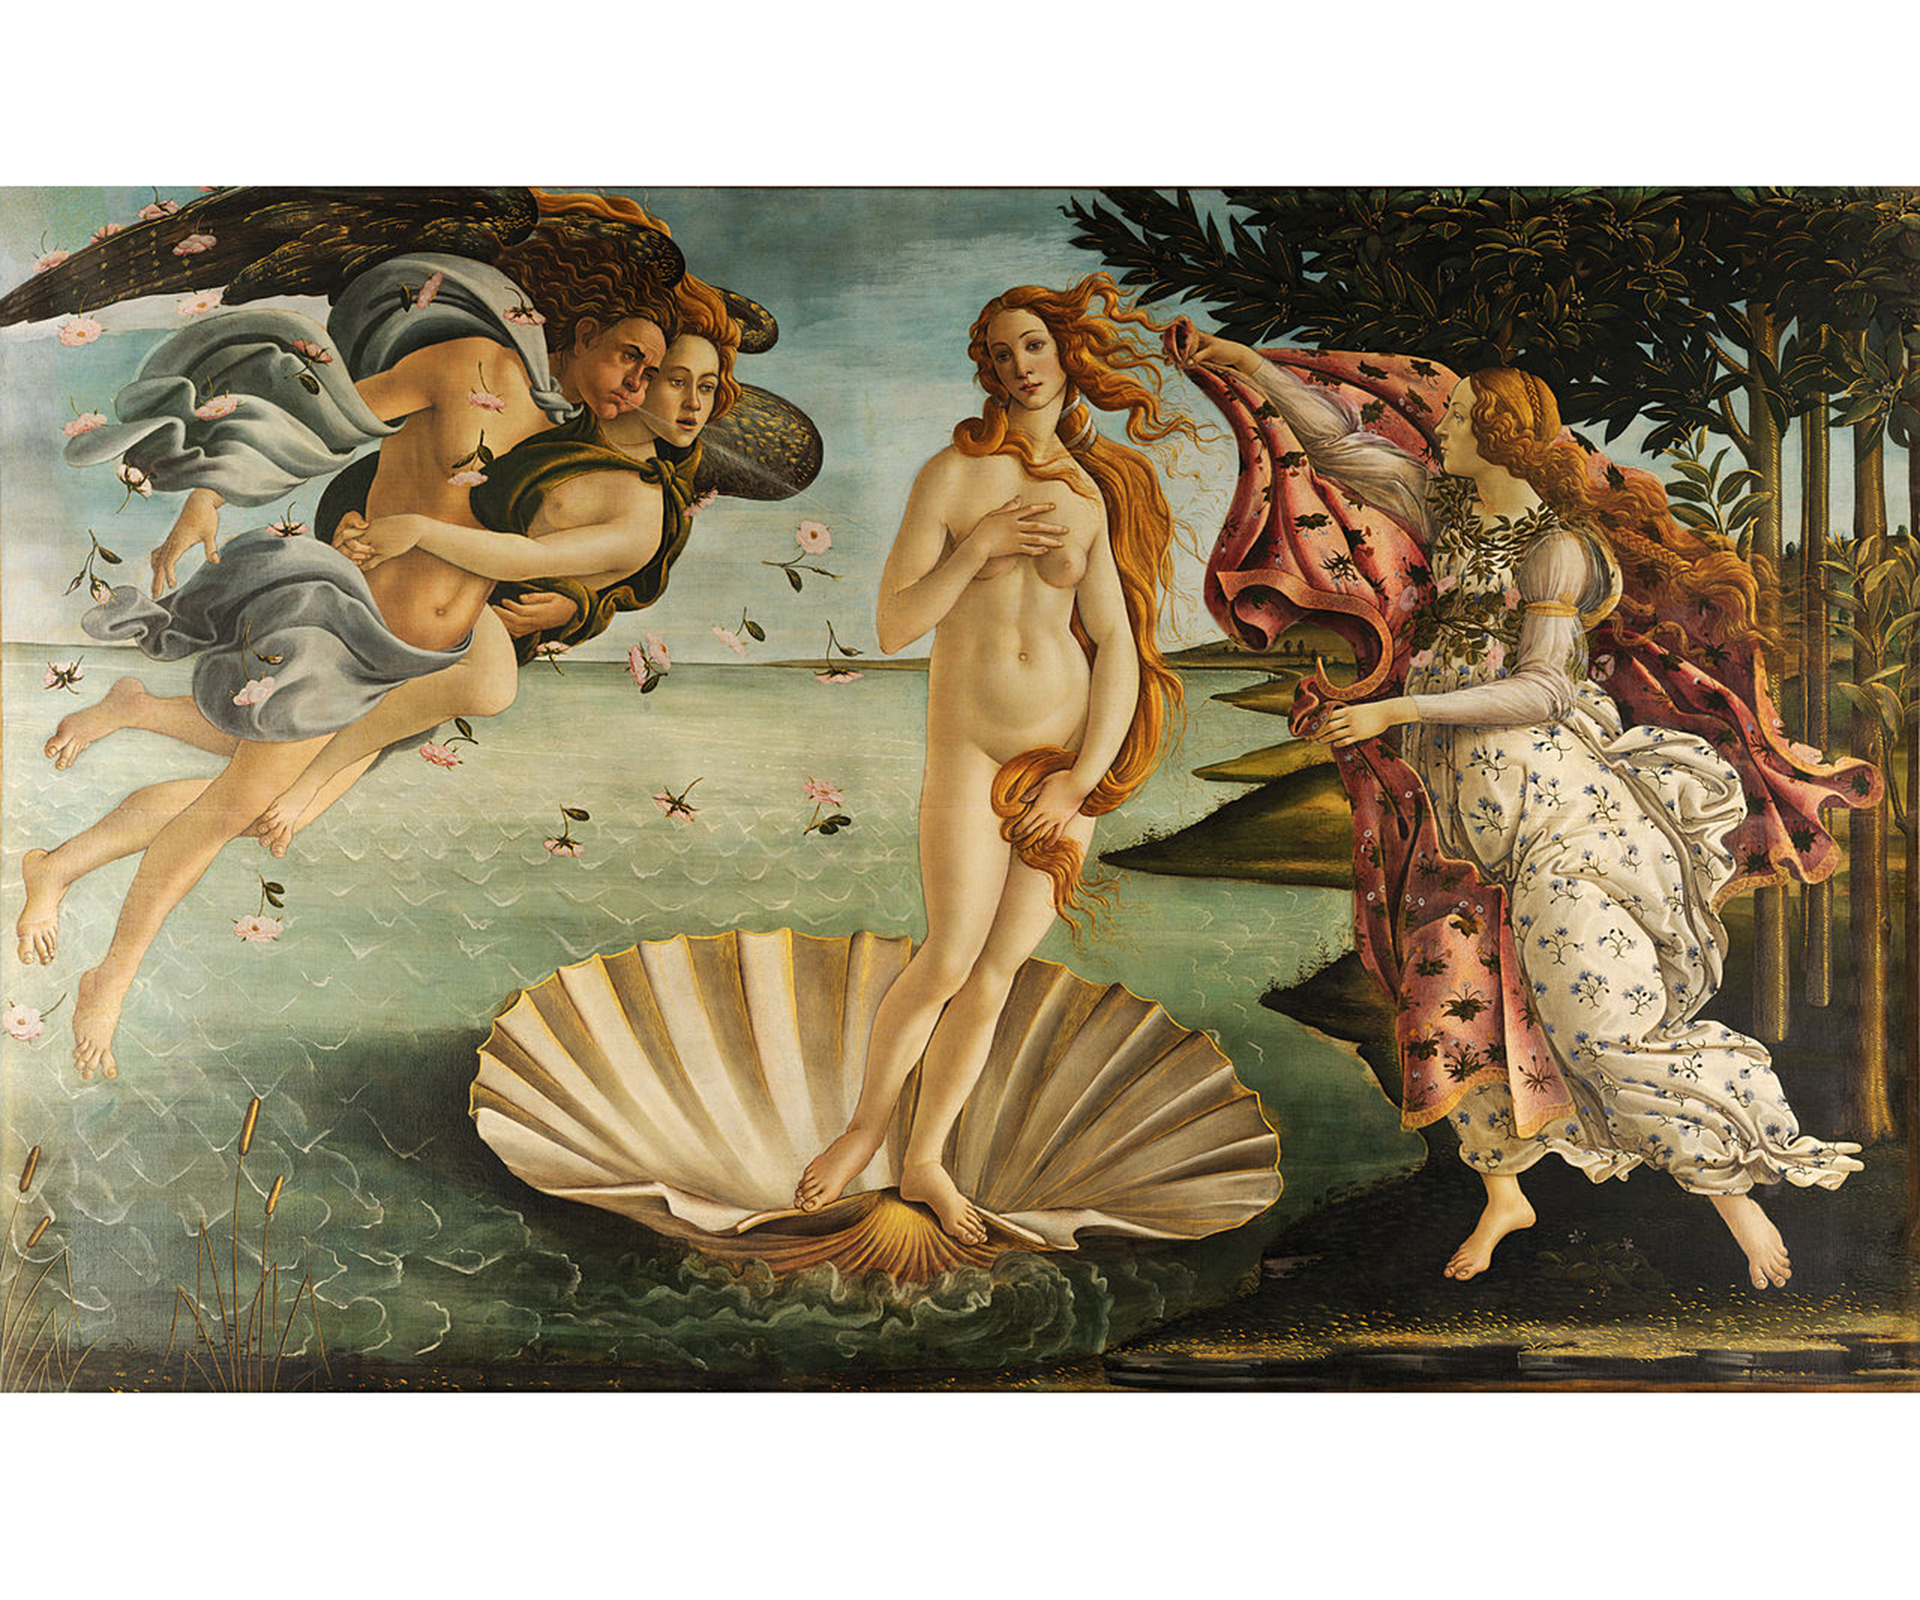 Venus the Roman Goddess of love as painted by Sandro Botticelli in 1486.